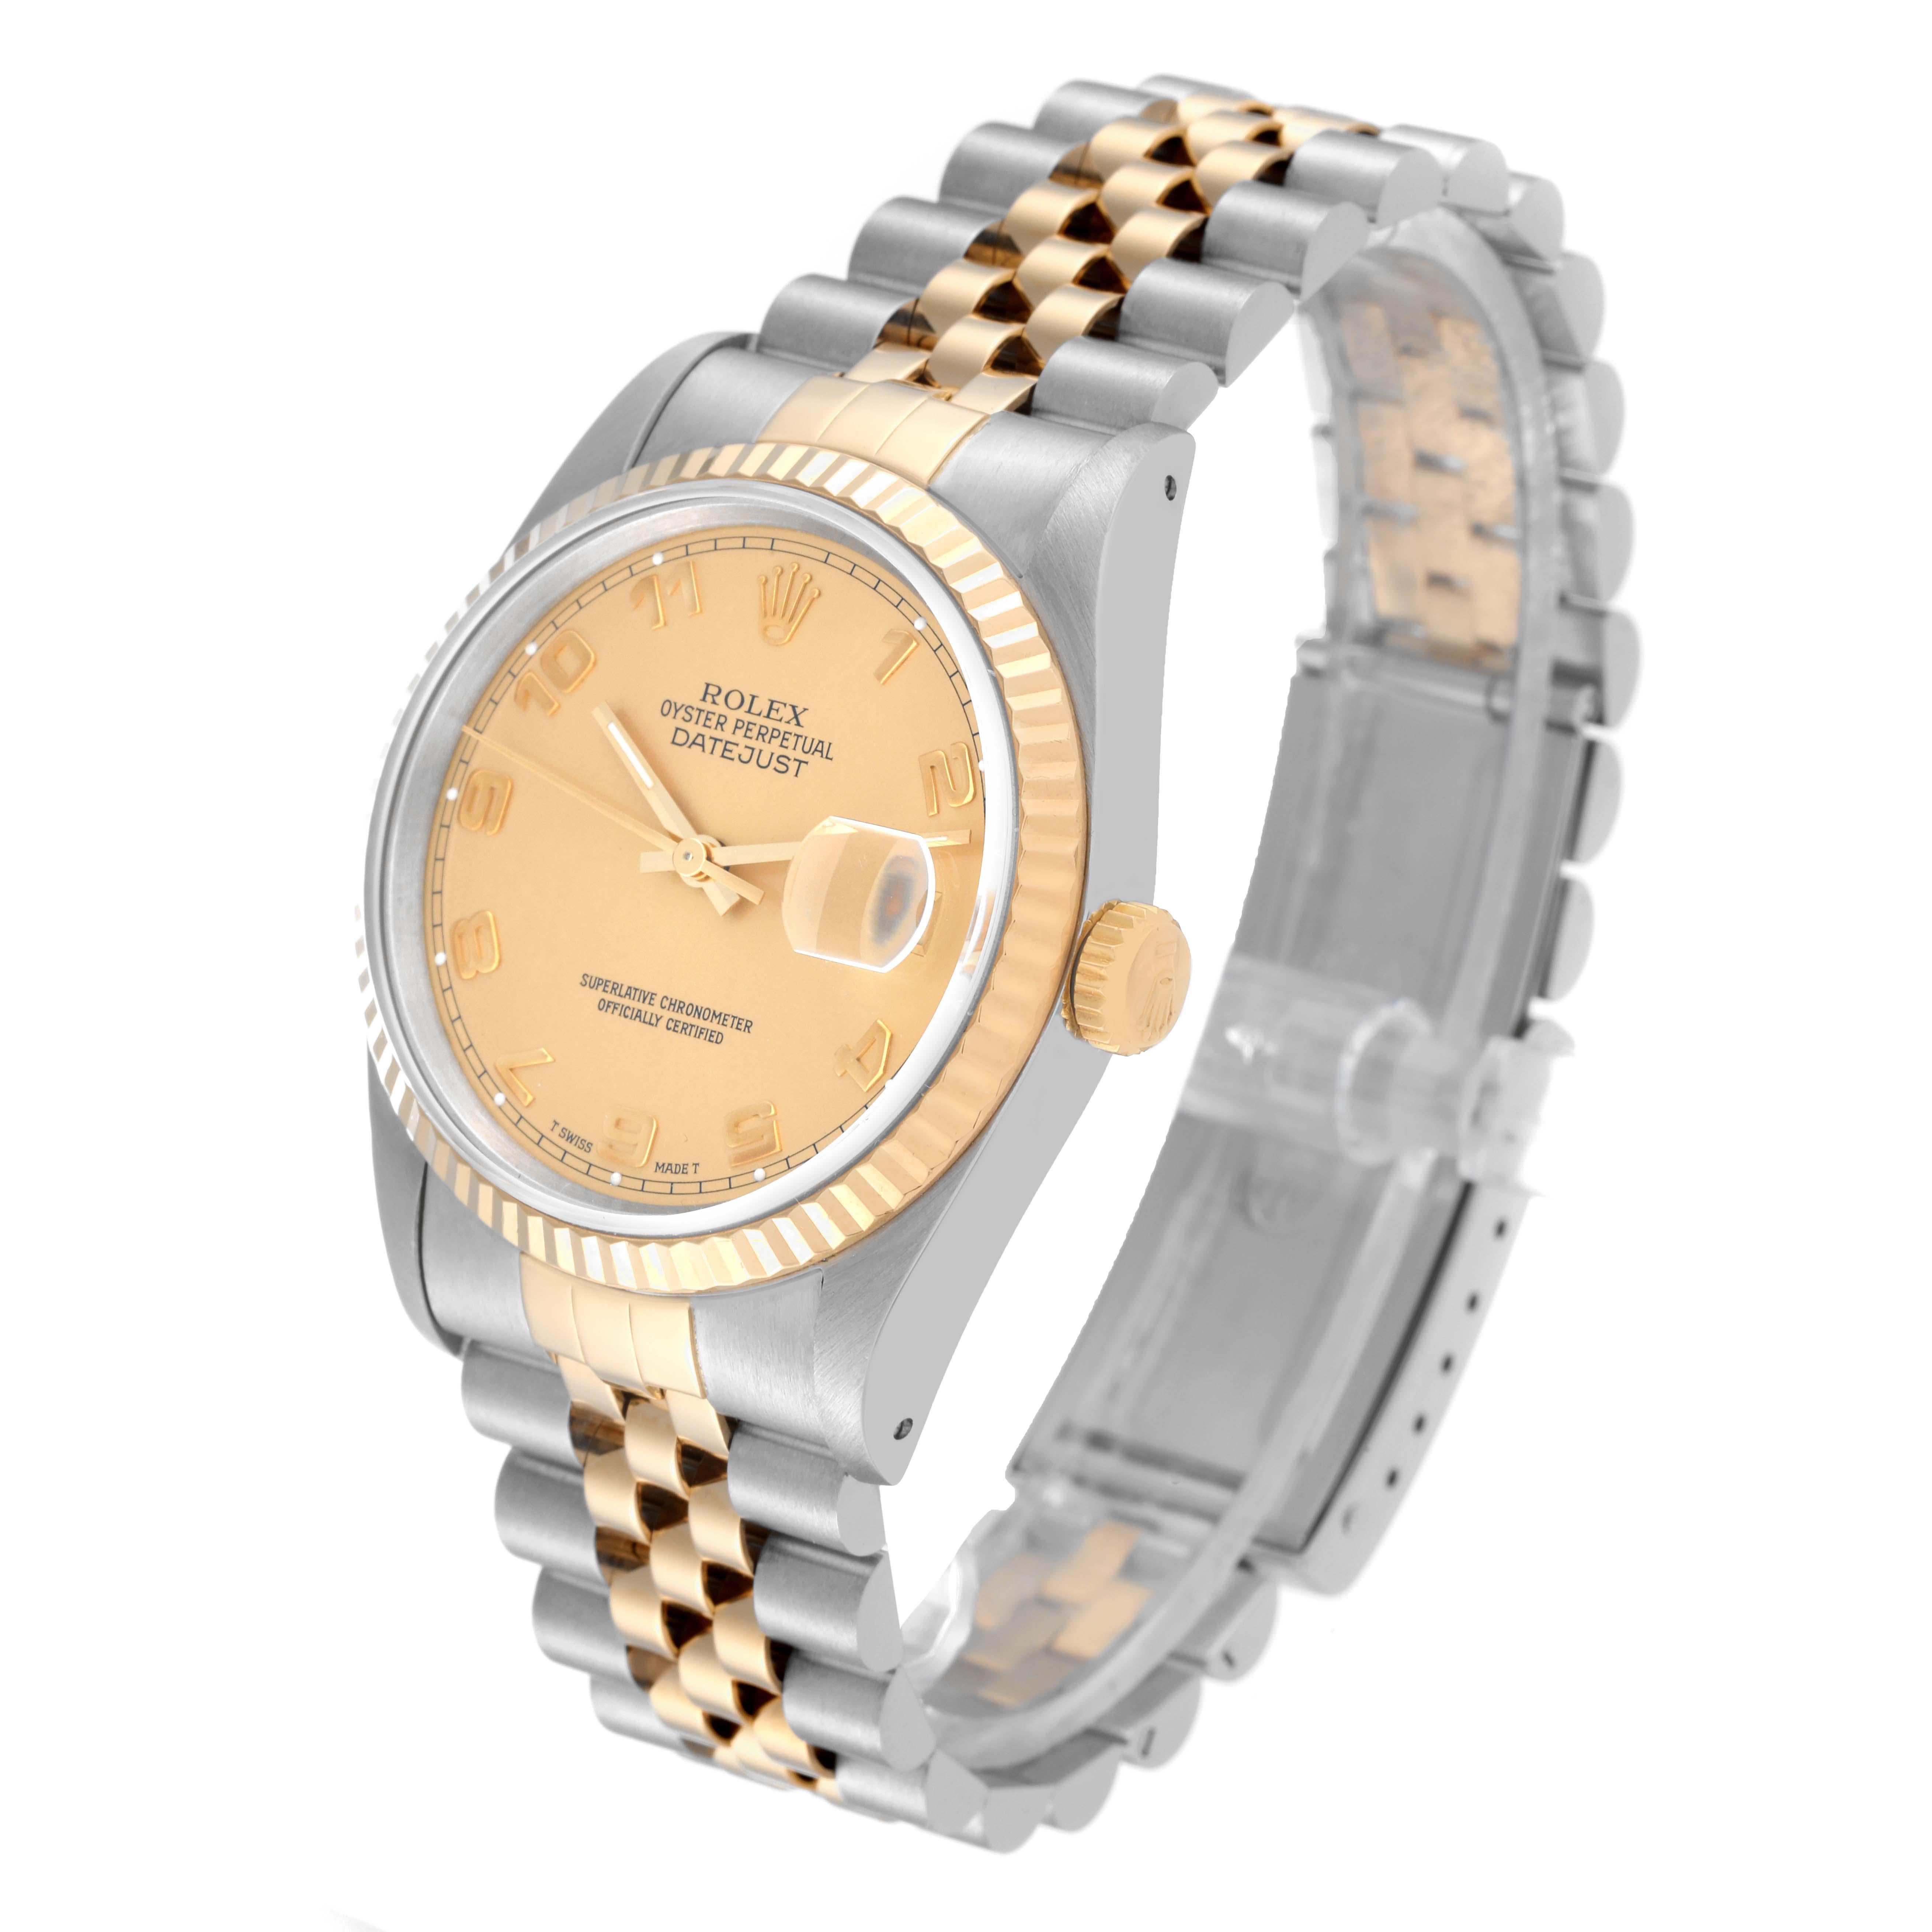 Men's Rolex Datejust Steel Yellow Gold Champagne Arabic Dial Watch 16233 Box Papers For Sale